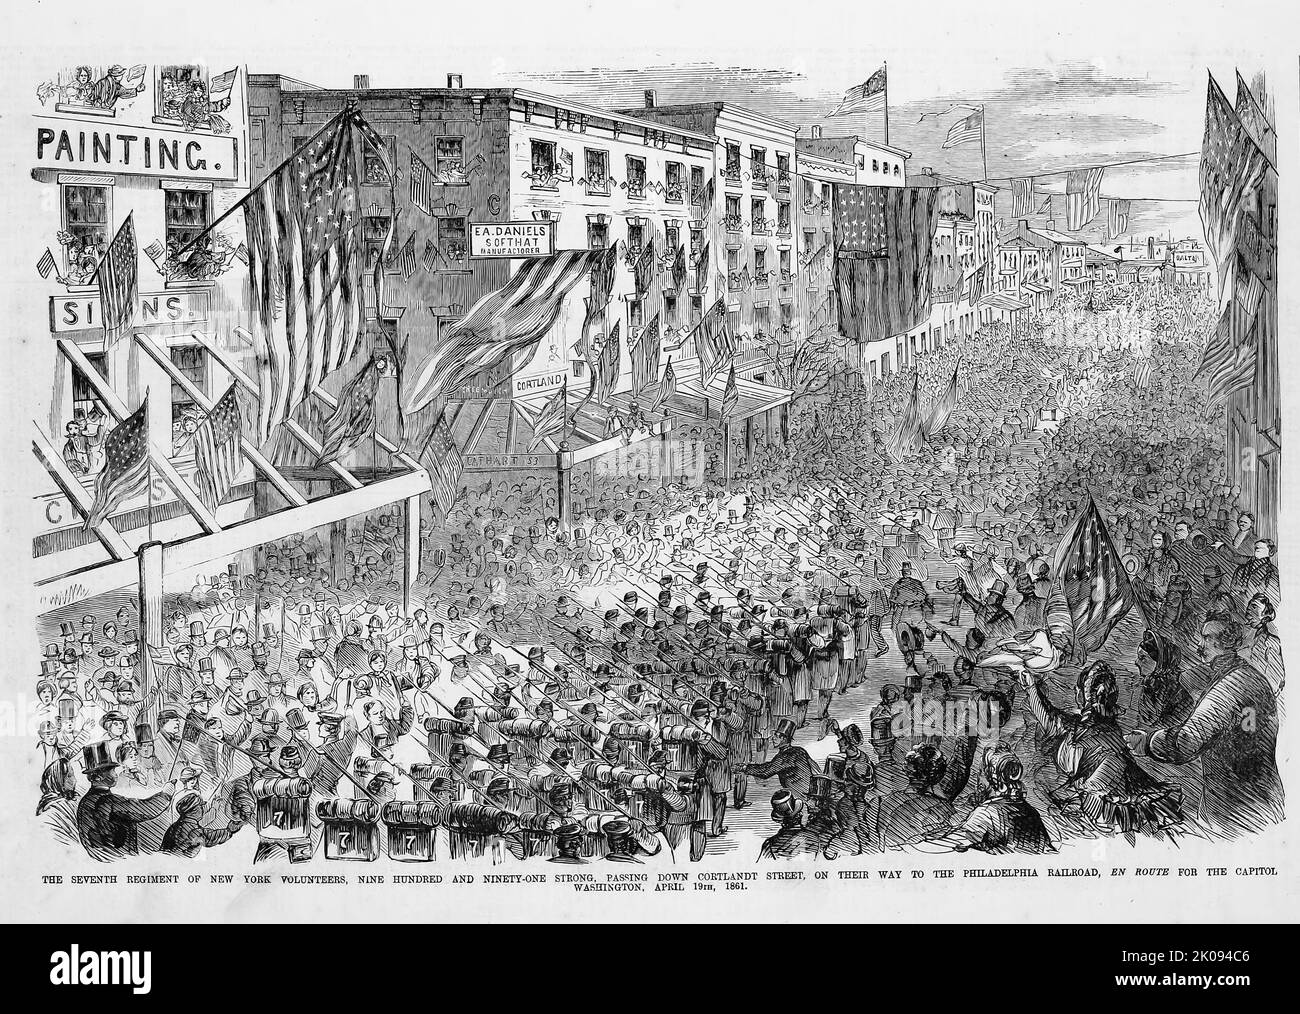 The Seventh Regiment of New York Volunteers, nine hundred and ninety-one strong, passing down Cortlandt Street, on their way to the Philadelphia Railroad, en route for the Capitol, Washington D. C., April 19th, 1861. 19th century American Civil War illustration from Frank Leslie's Illustrated Newspaper Stock Photo